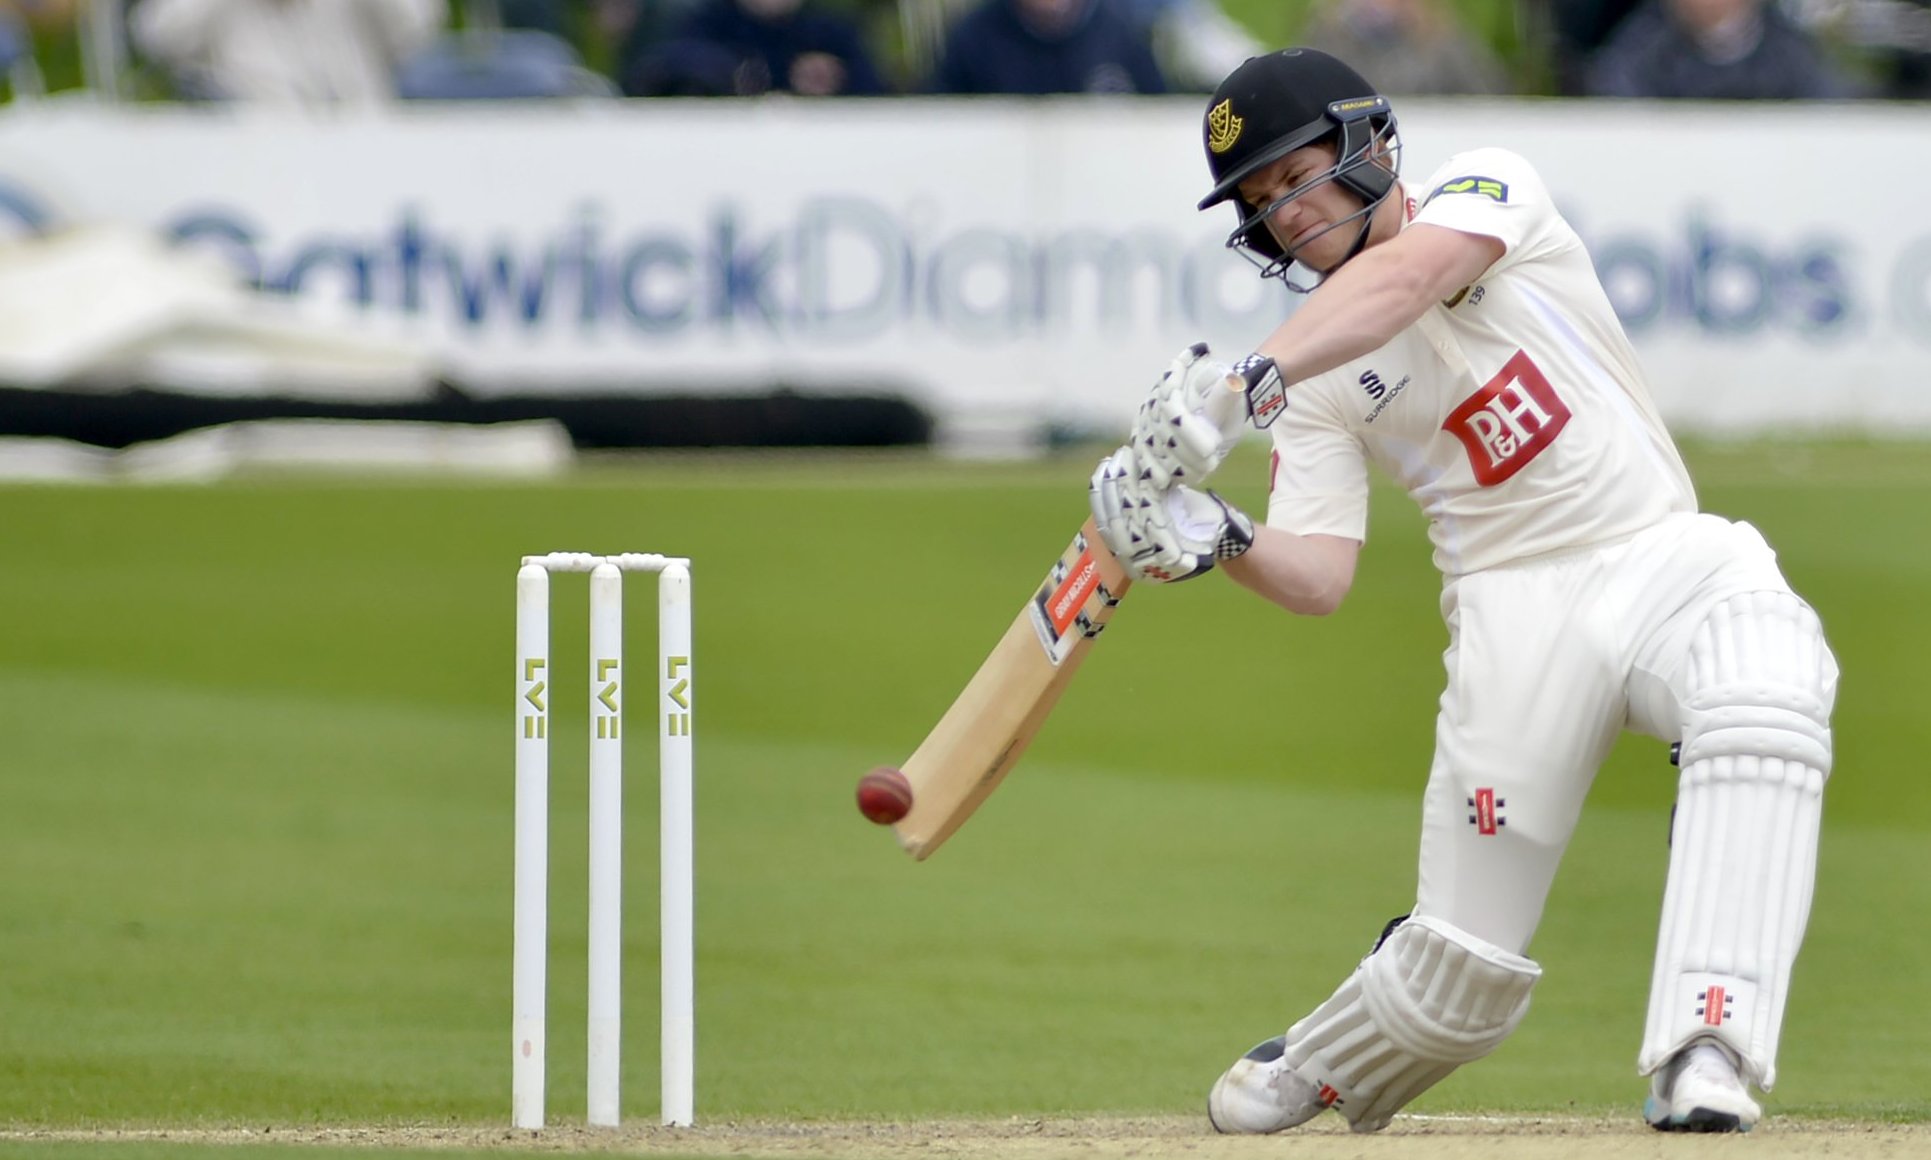 New Sussex skipper Ben Brown ready for first selection headache - The Argus